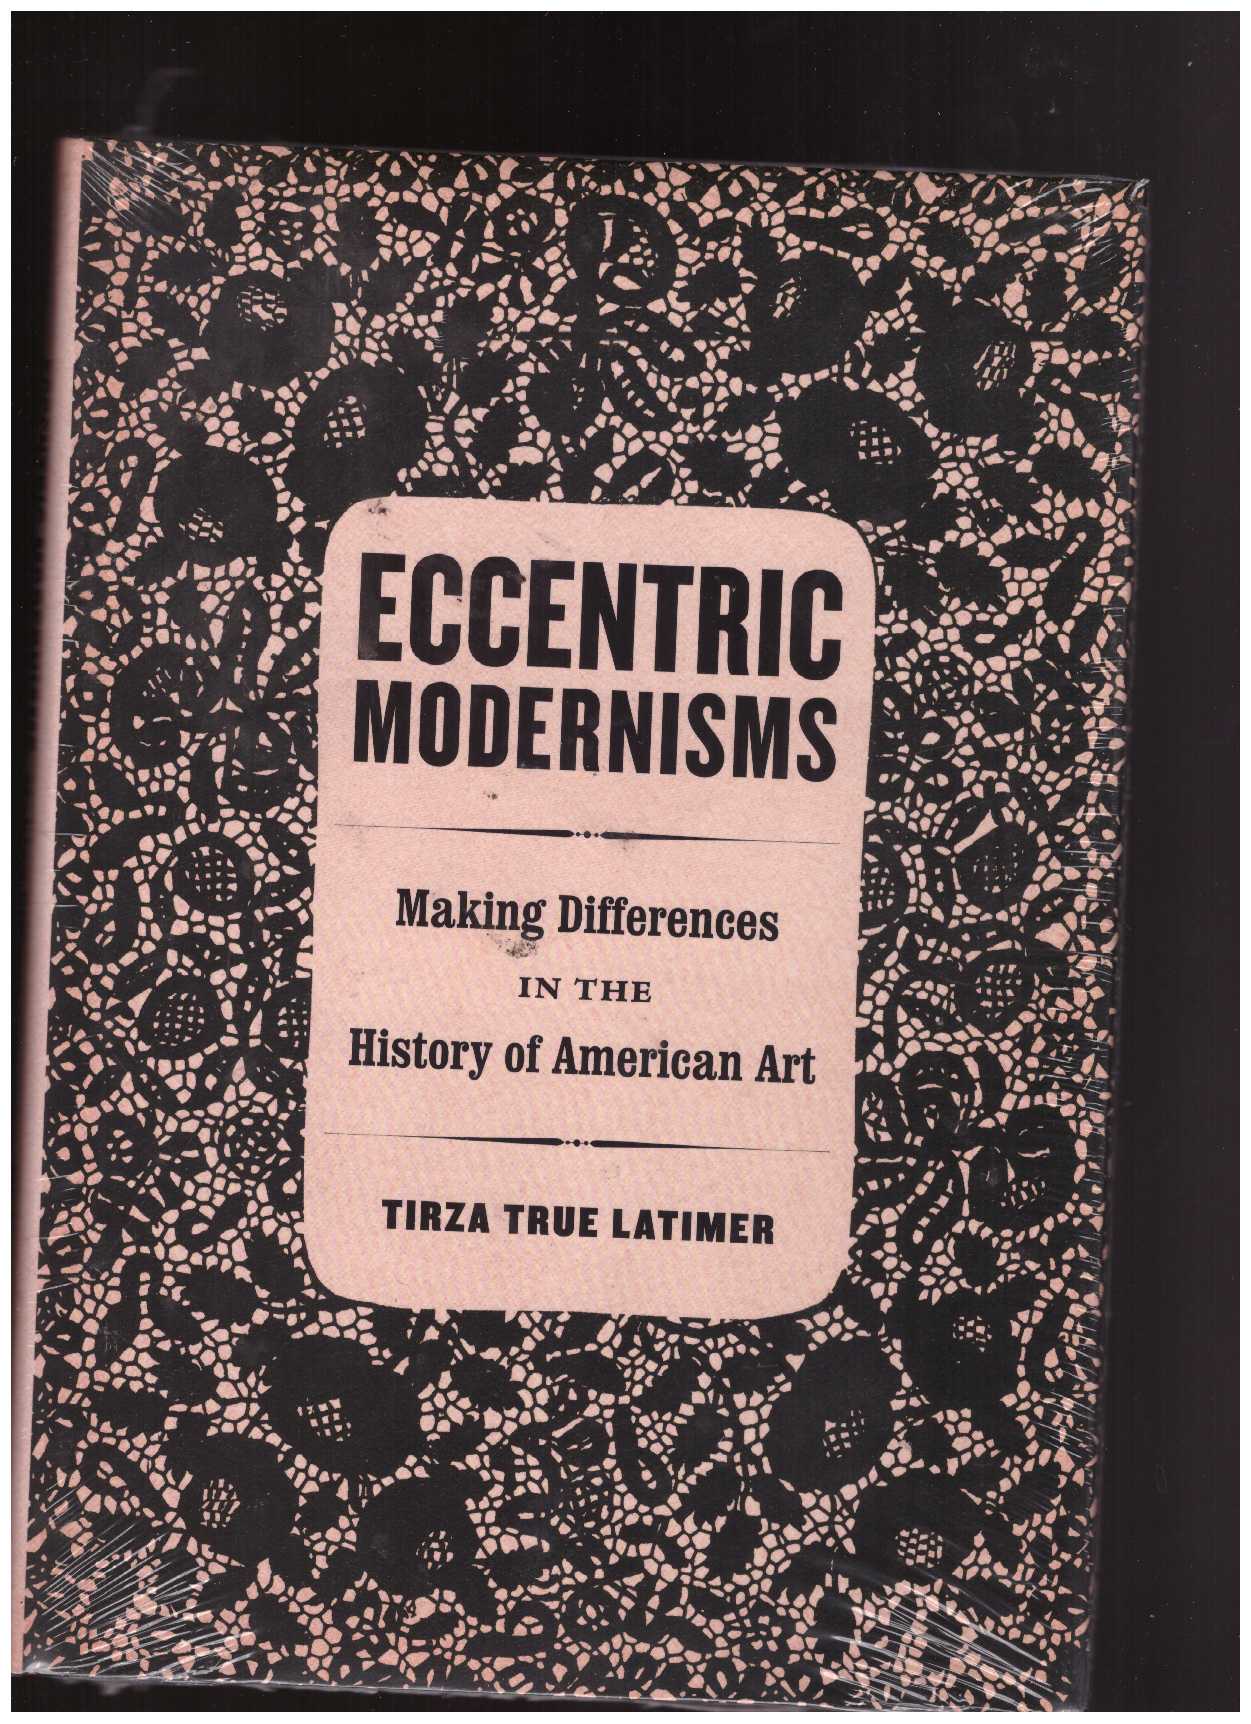 LATIMER, Tirza T. - Eccentric Modernisms. Making Differences in the History of American Art